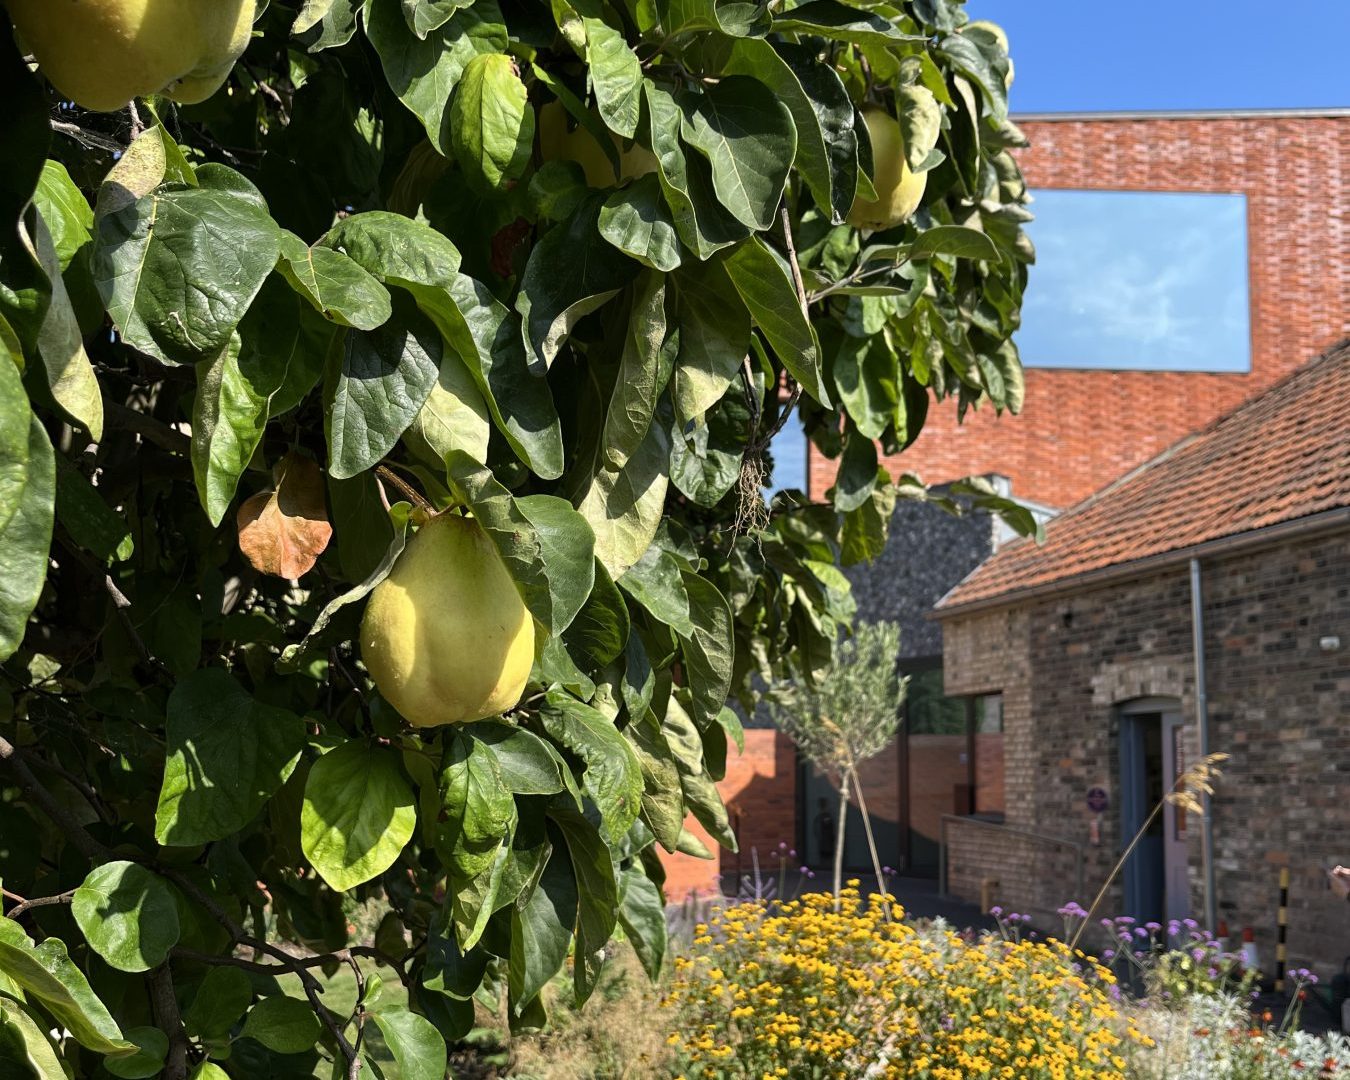 An image of the quincetree in the Gainsborough's House walled-gardens. The new galleries can be seen in the background with a bright blue sky.